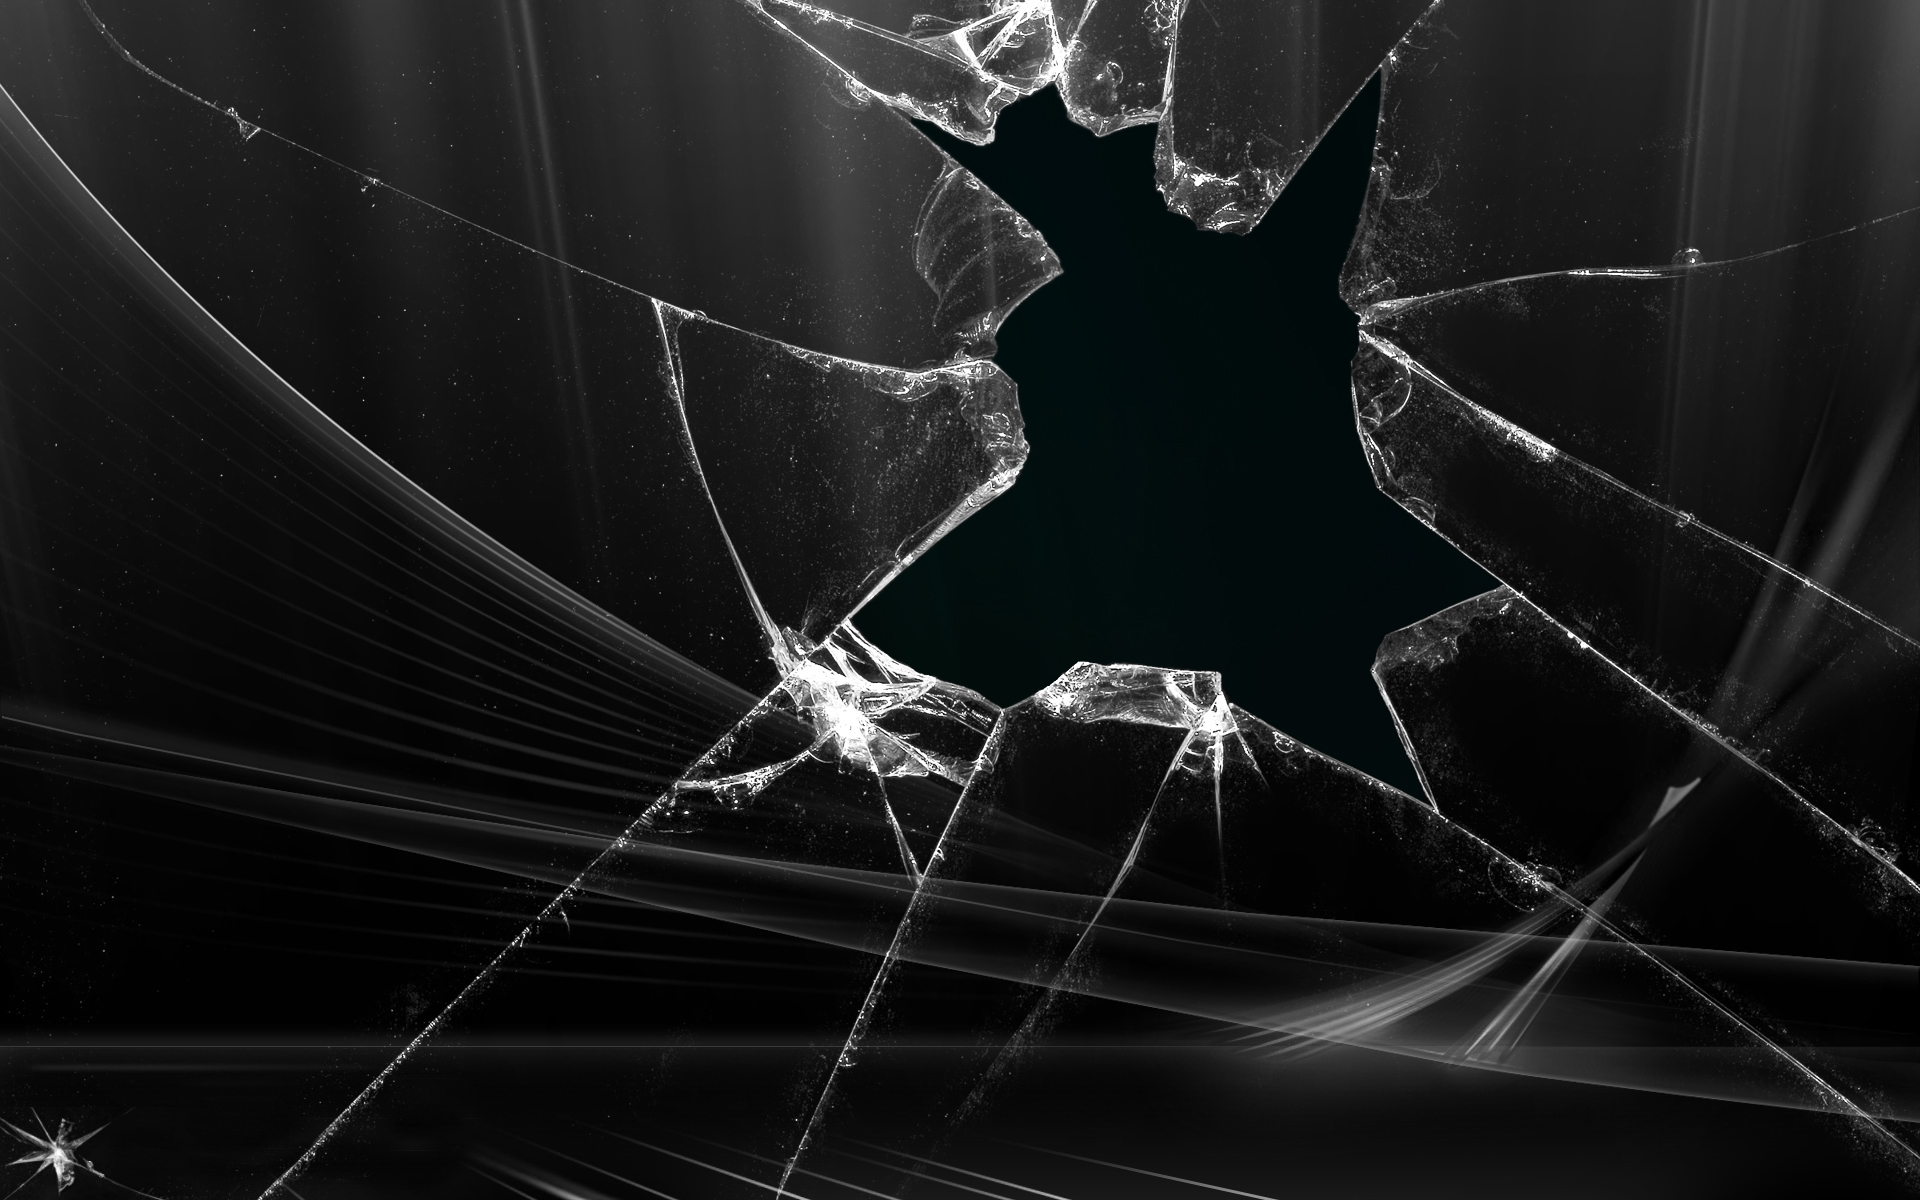 Cracked Screen Wallpaper Windows 10 77 images